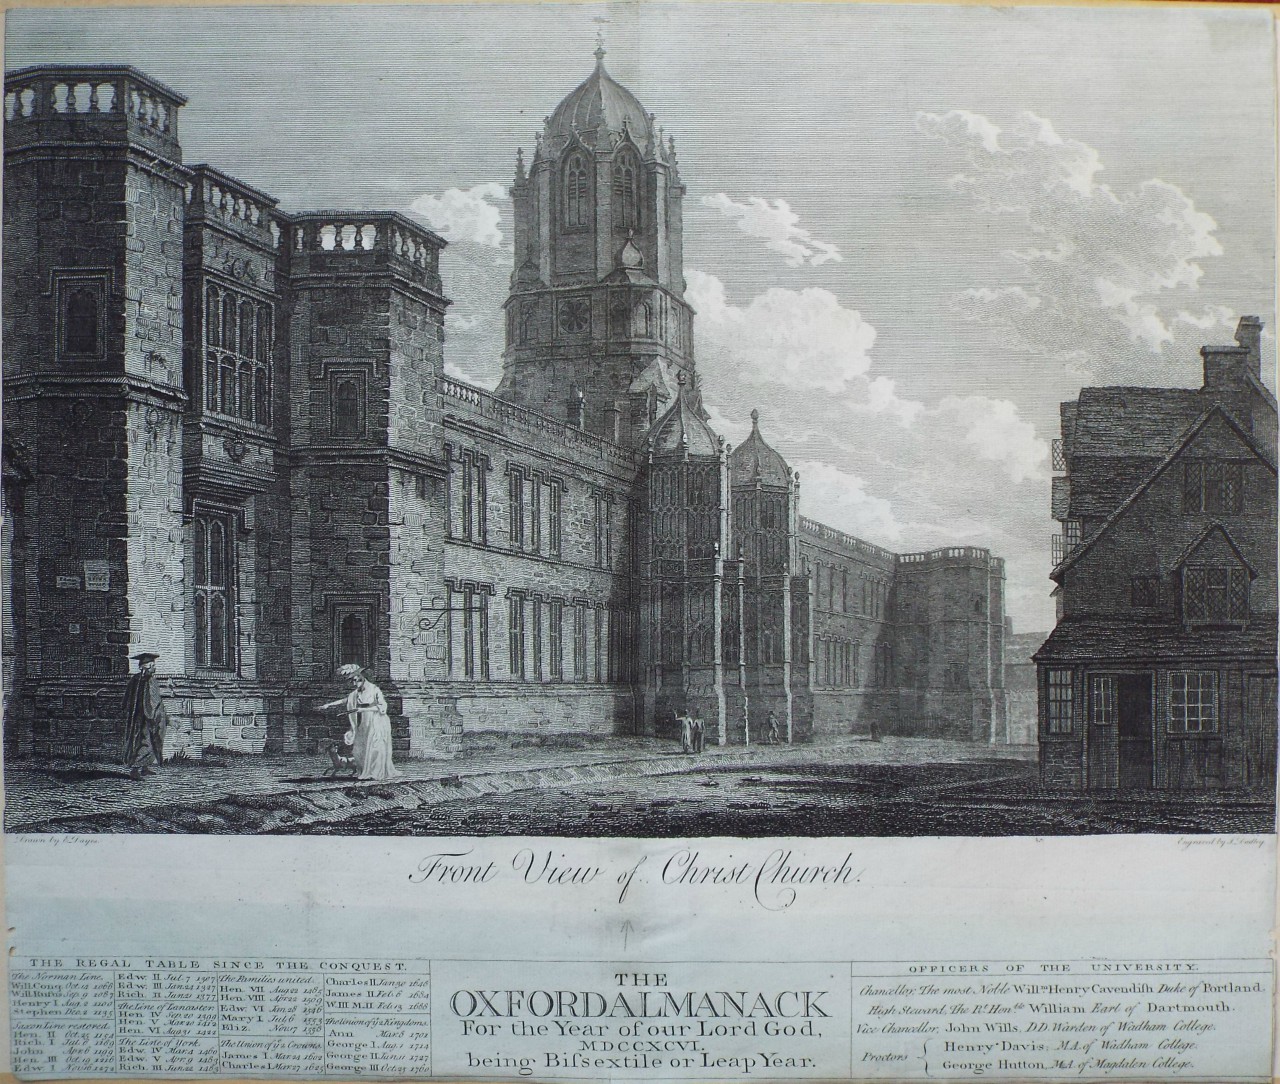 Print - Front View of Christ Church. - Dadley